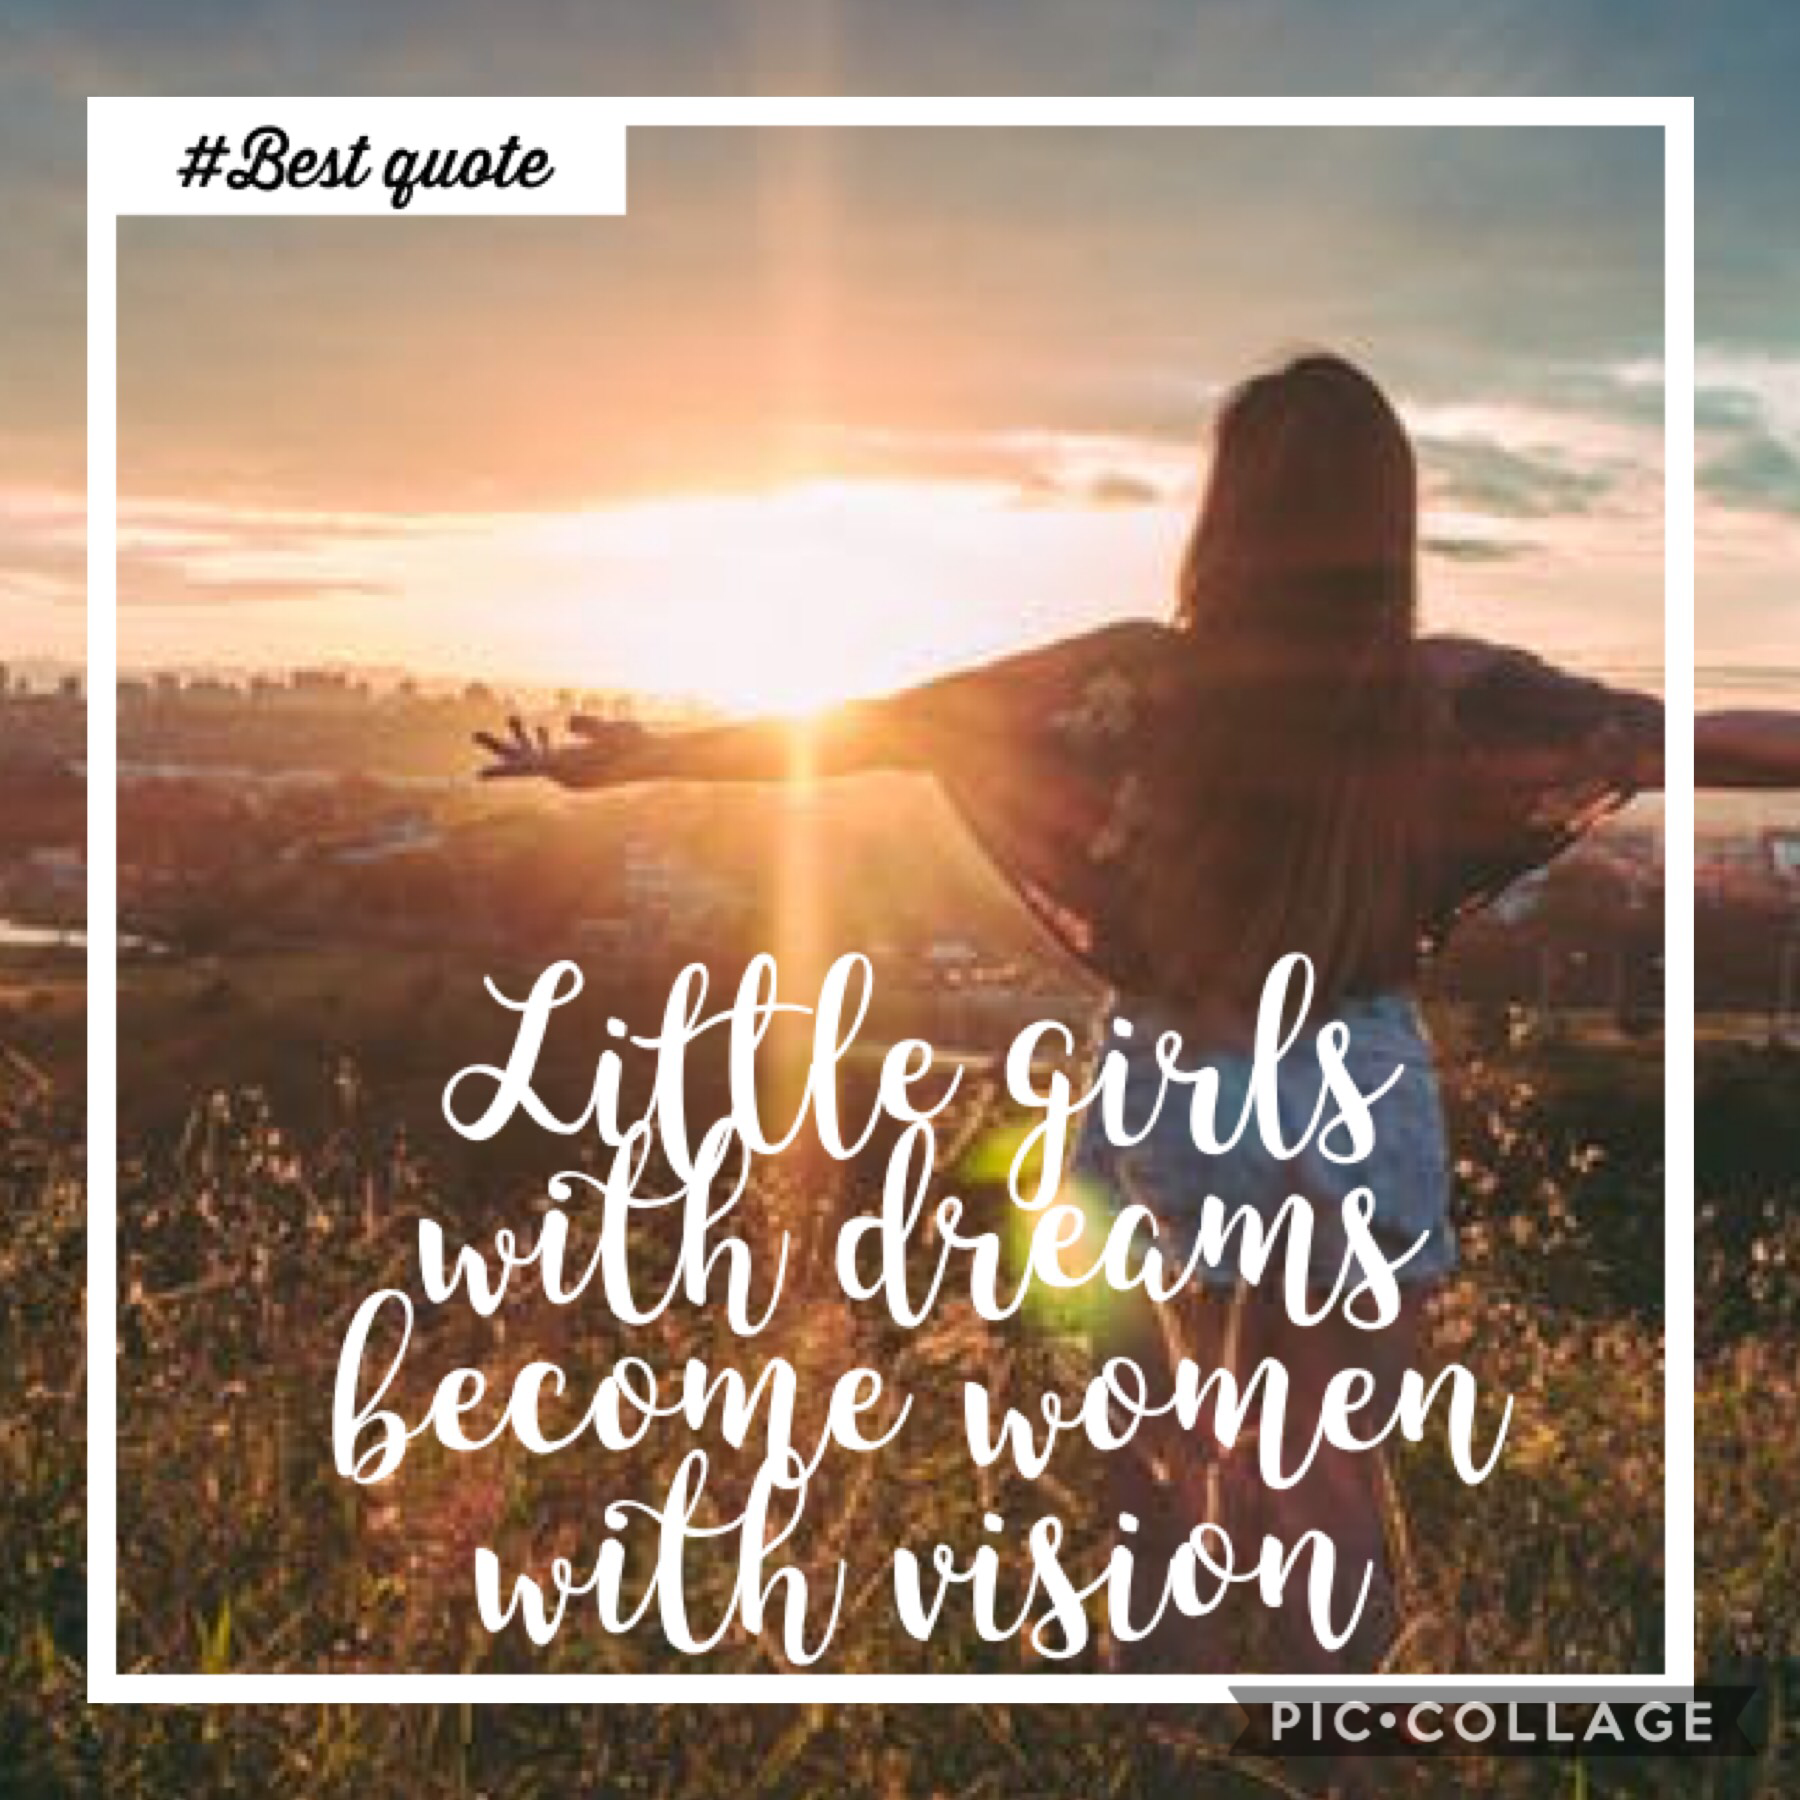 ✨Tap✨


✨Little girls with dreams become women with vision✨

✨Write #Best quote✨ if you read this✨